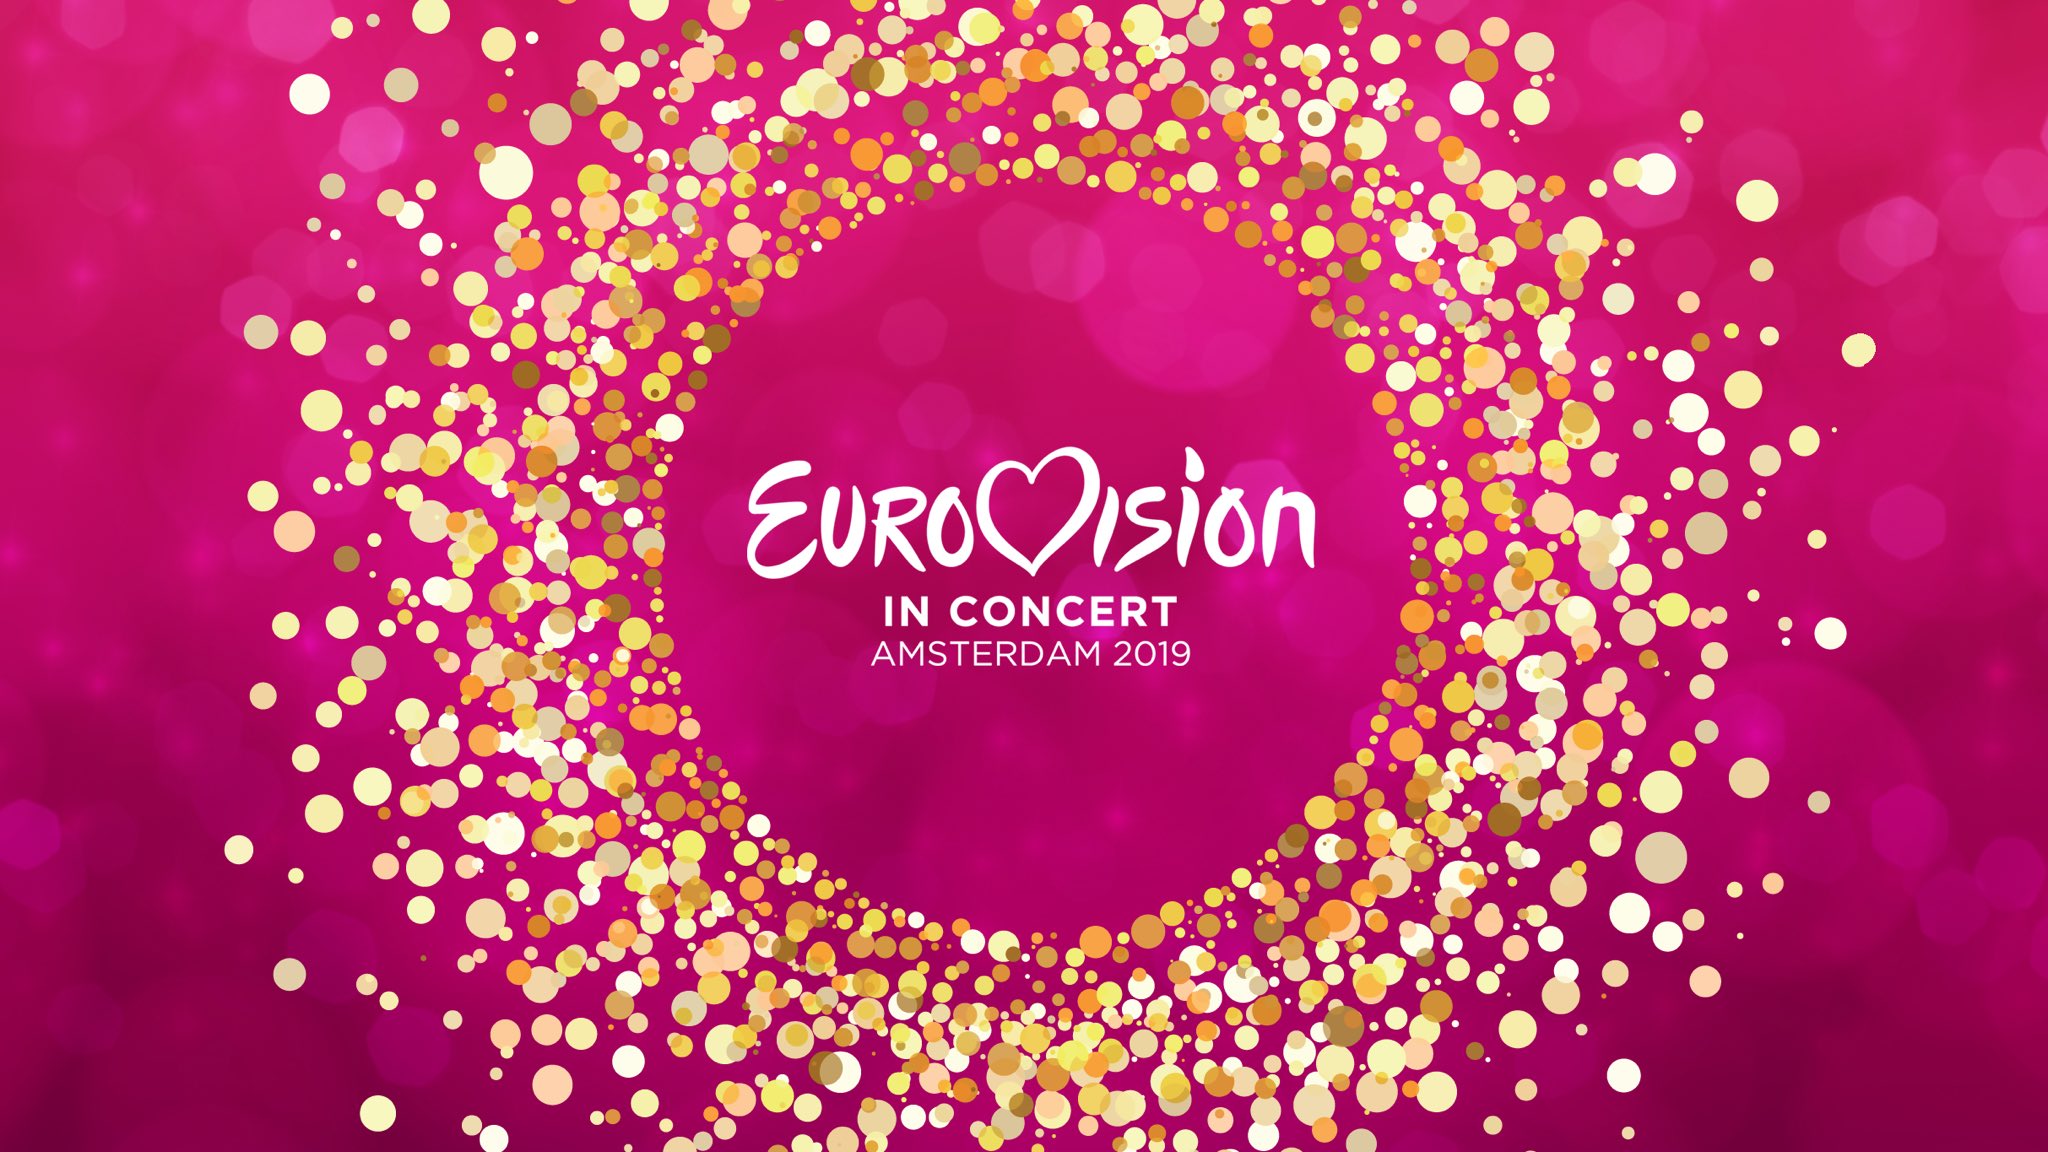 Tonight: Eurovision in Concert takes place in Amsterdam